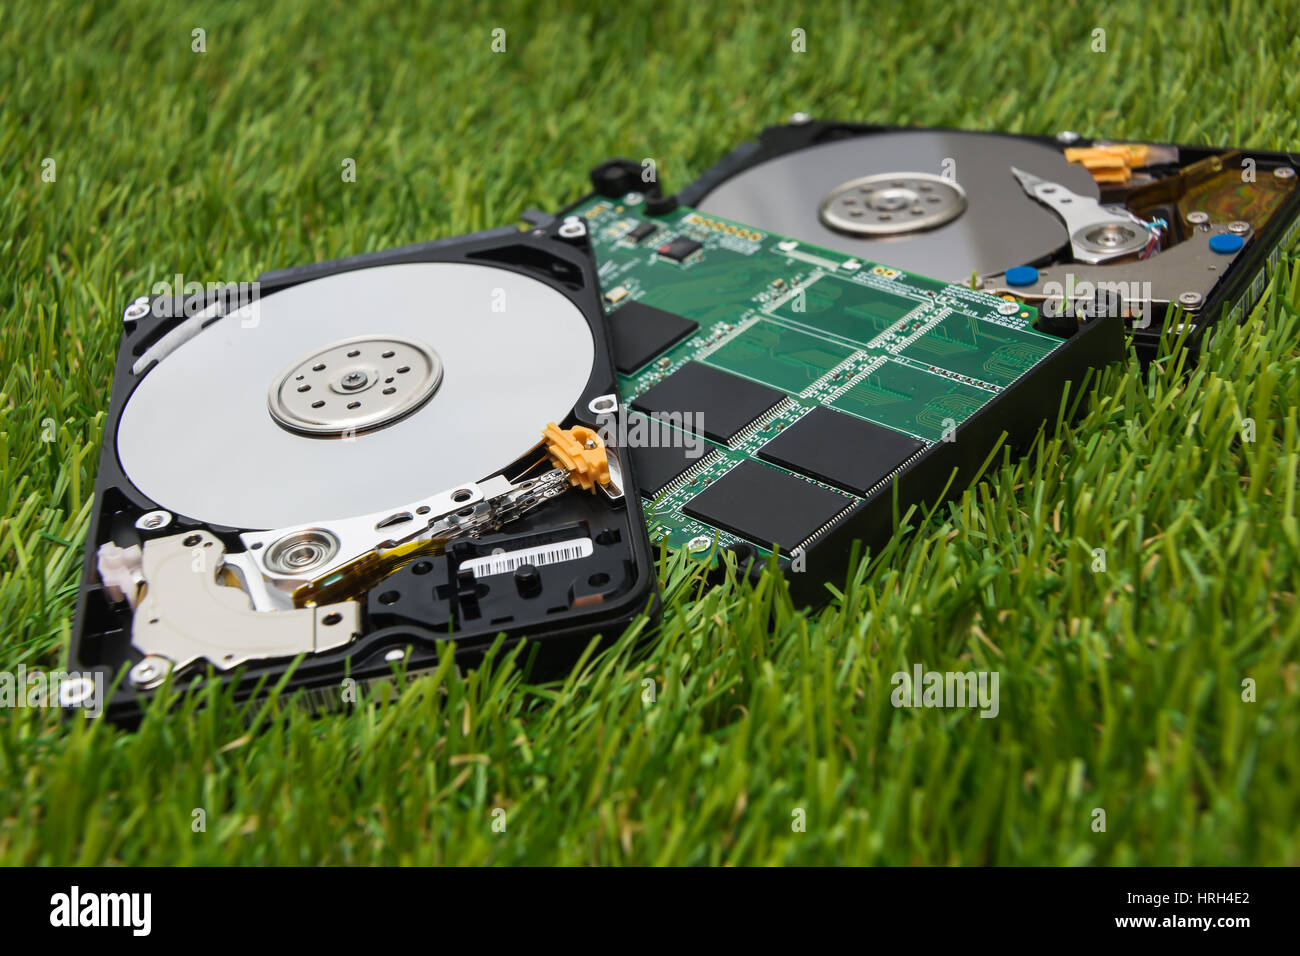 new SSD and a few old HDD to the green grass Stock Photo